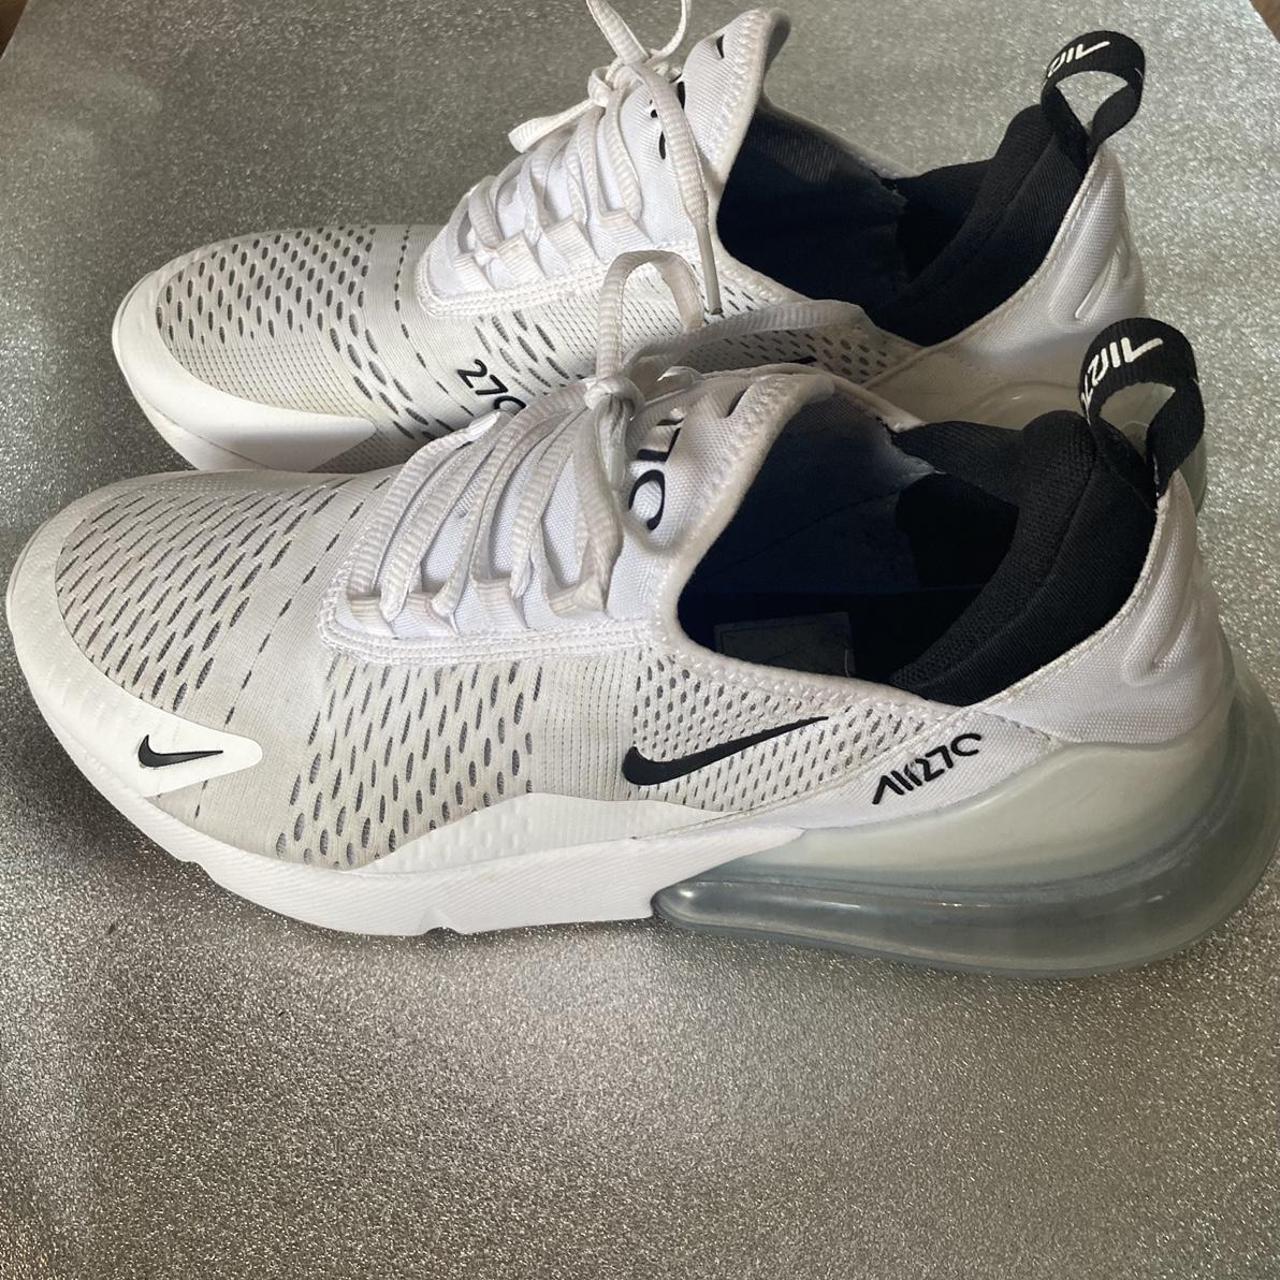 Mens nike 270 white size 11 collection from... - Depop